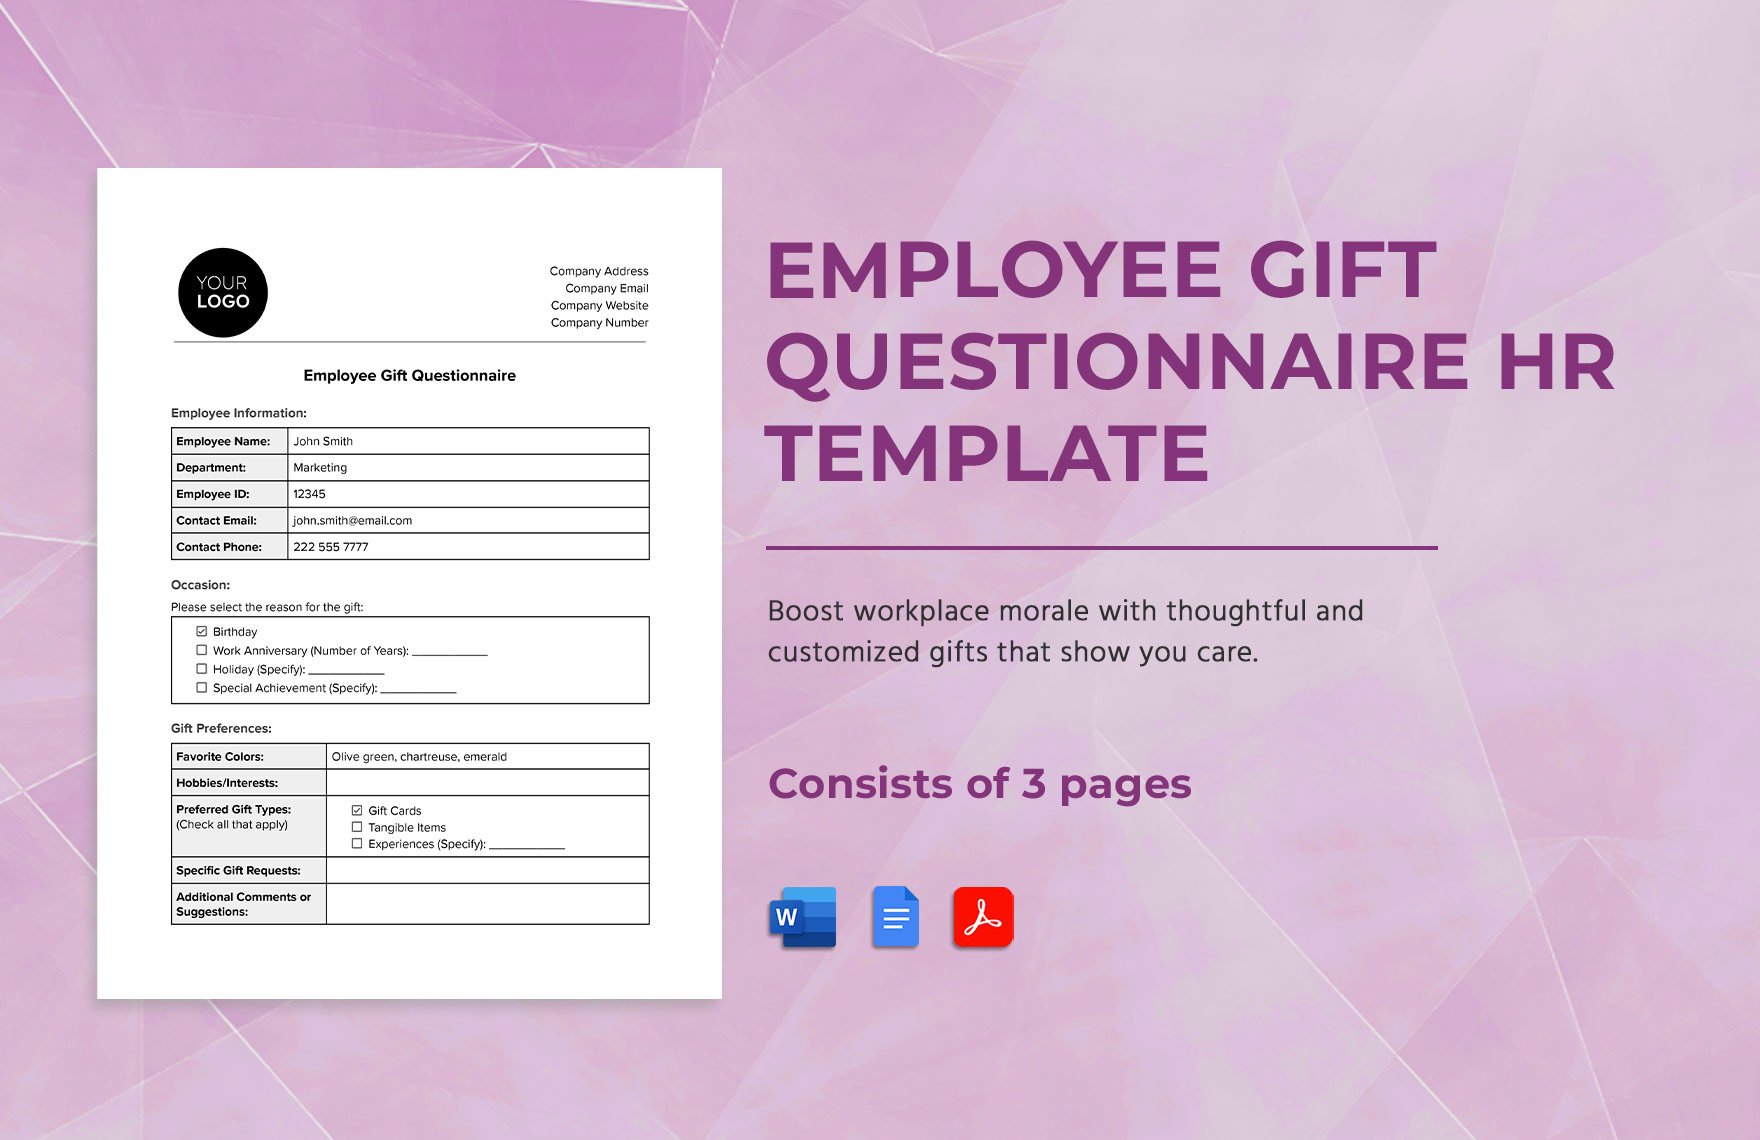 Employee Gift Questionnaire HR Template in Word, Google Docs, PDF